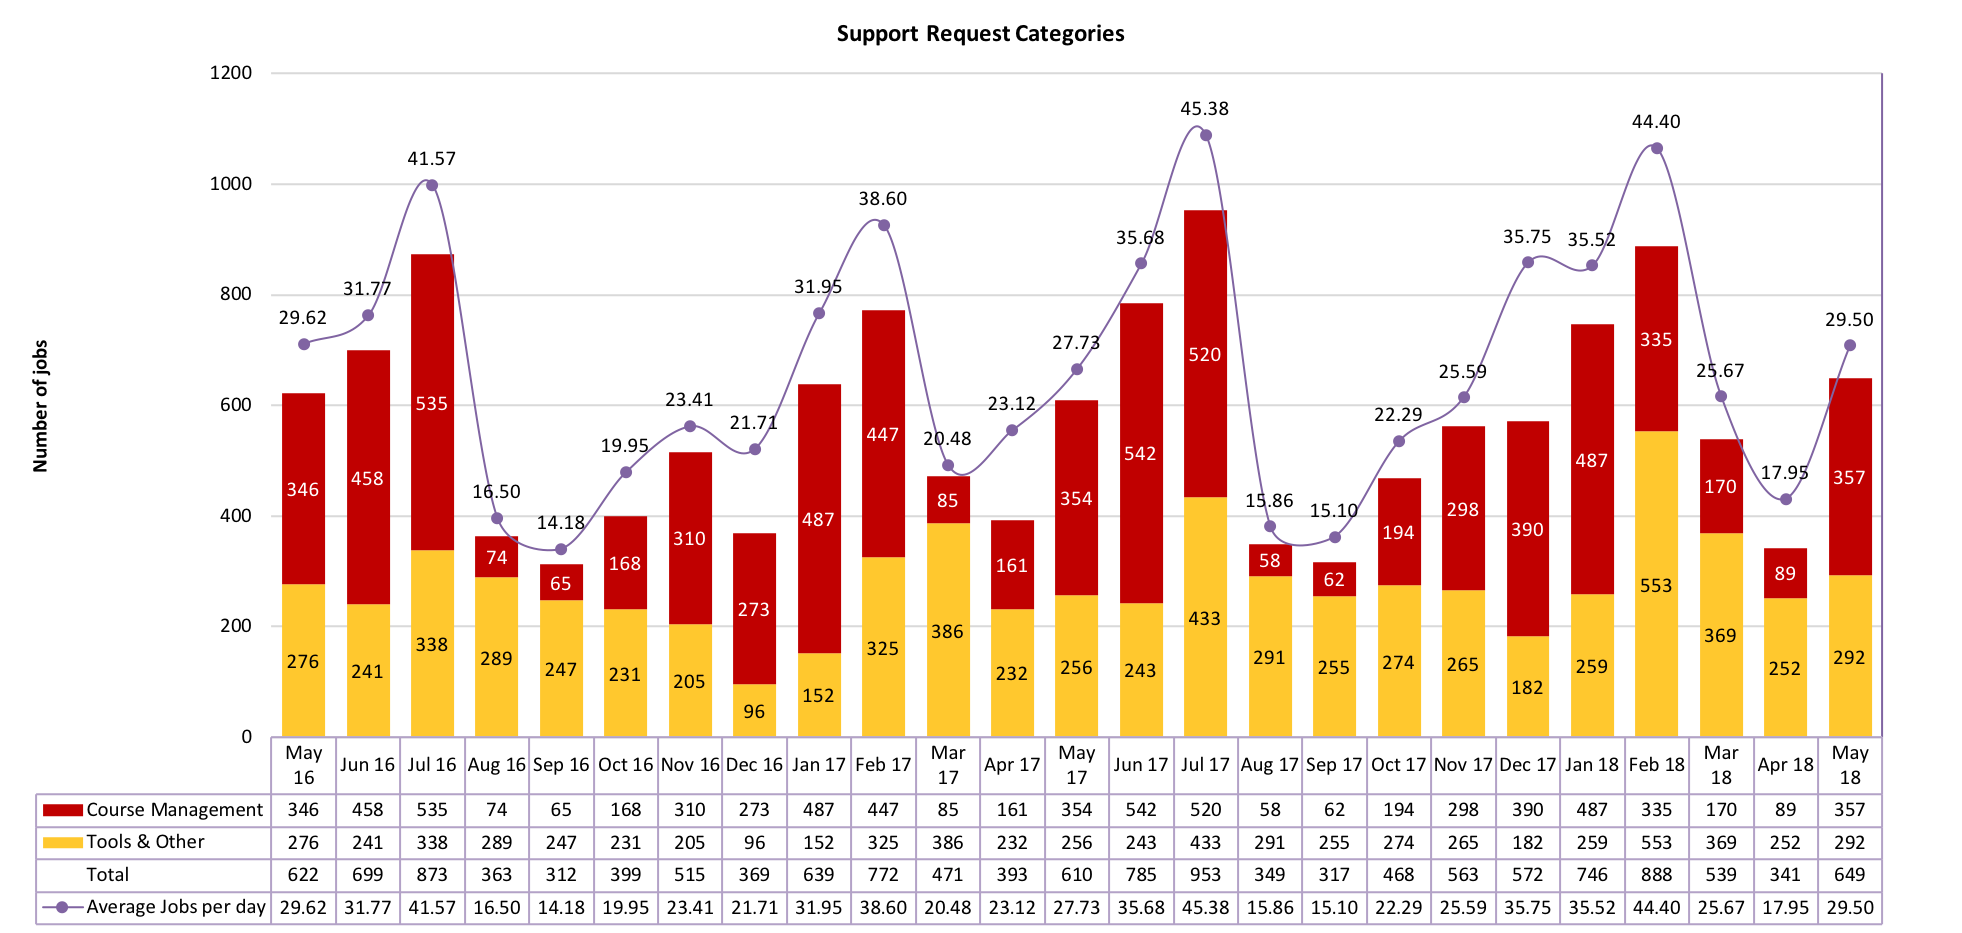 Chart of Support Request Categories from May 2016 to May 2018